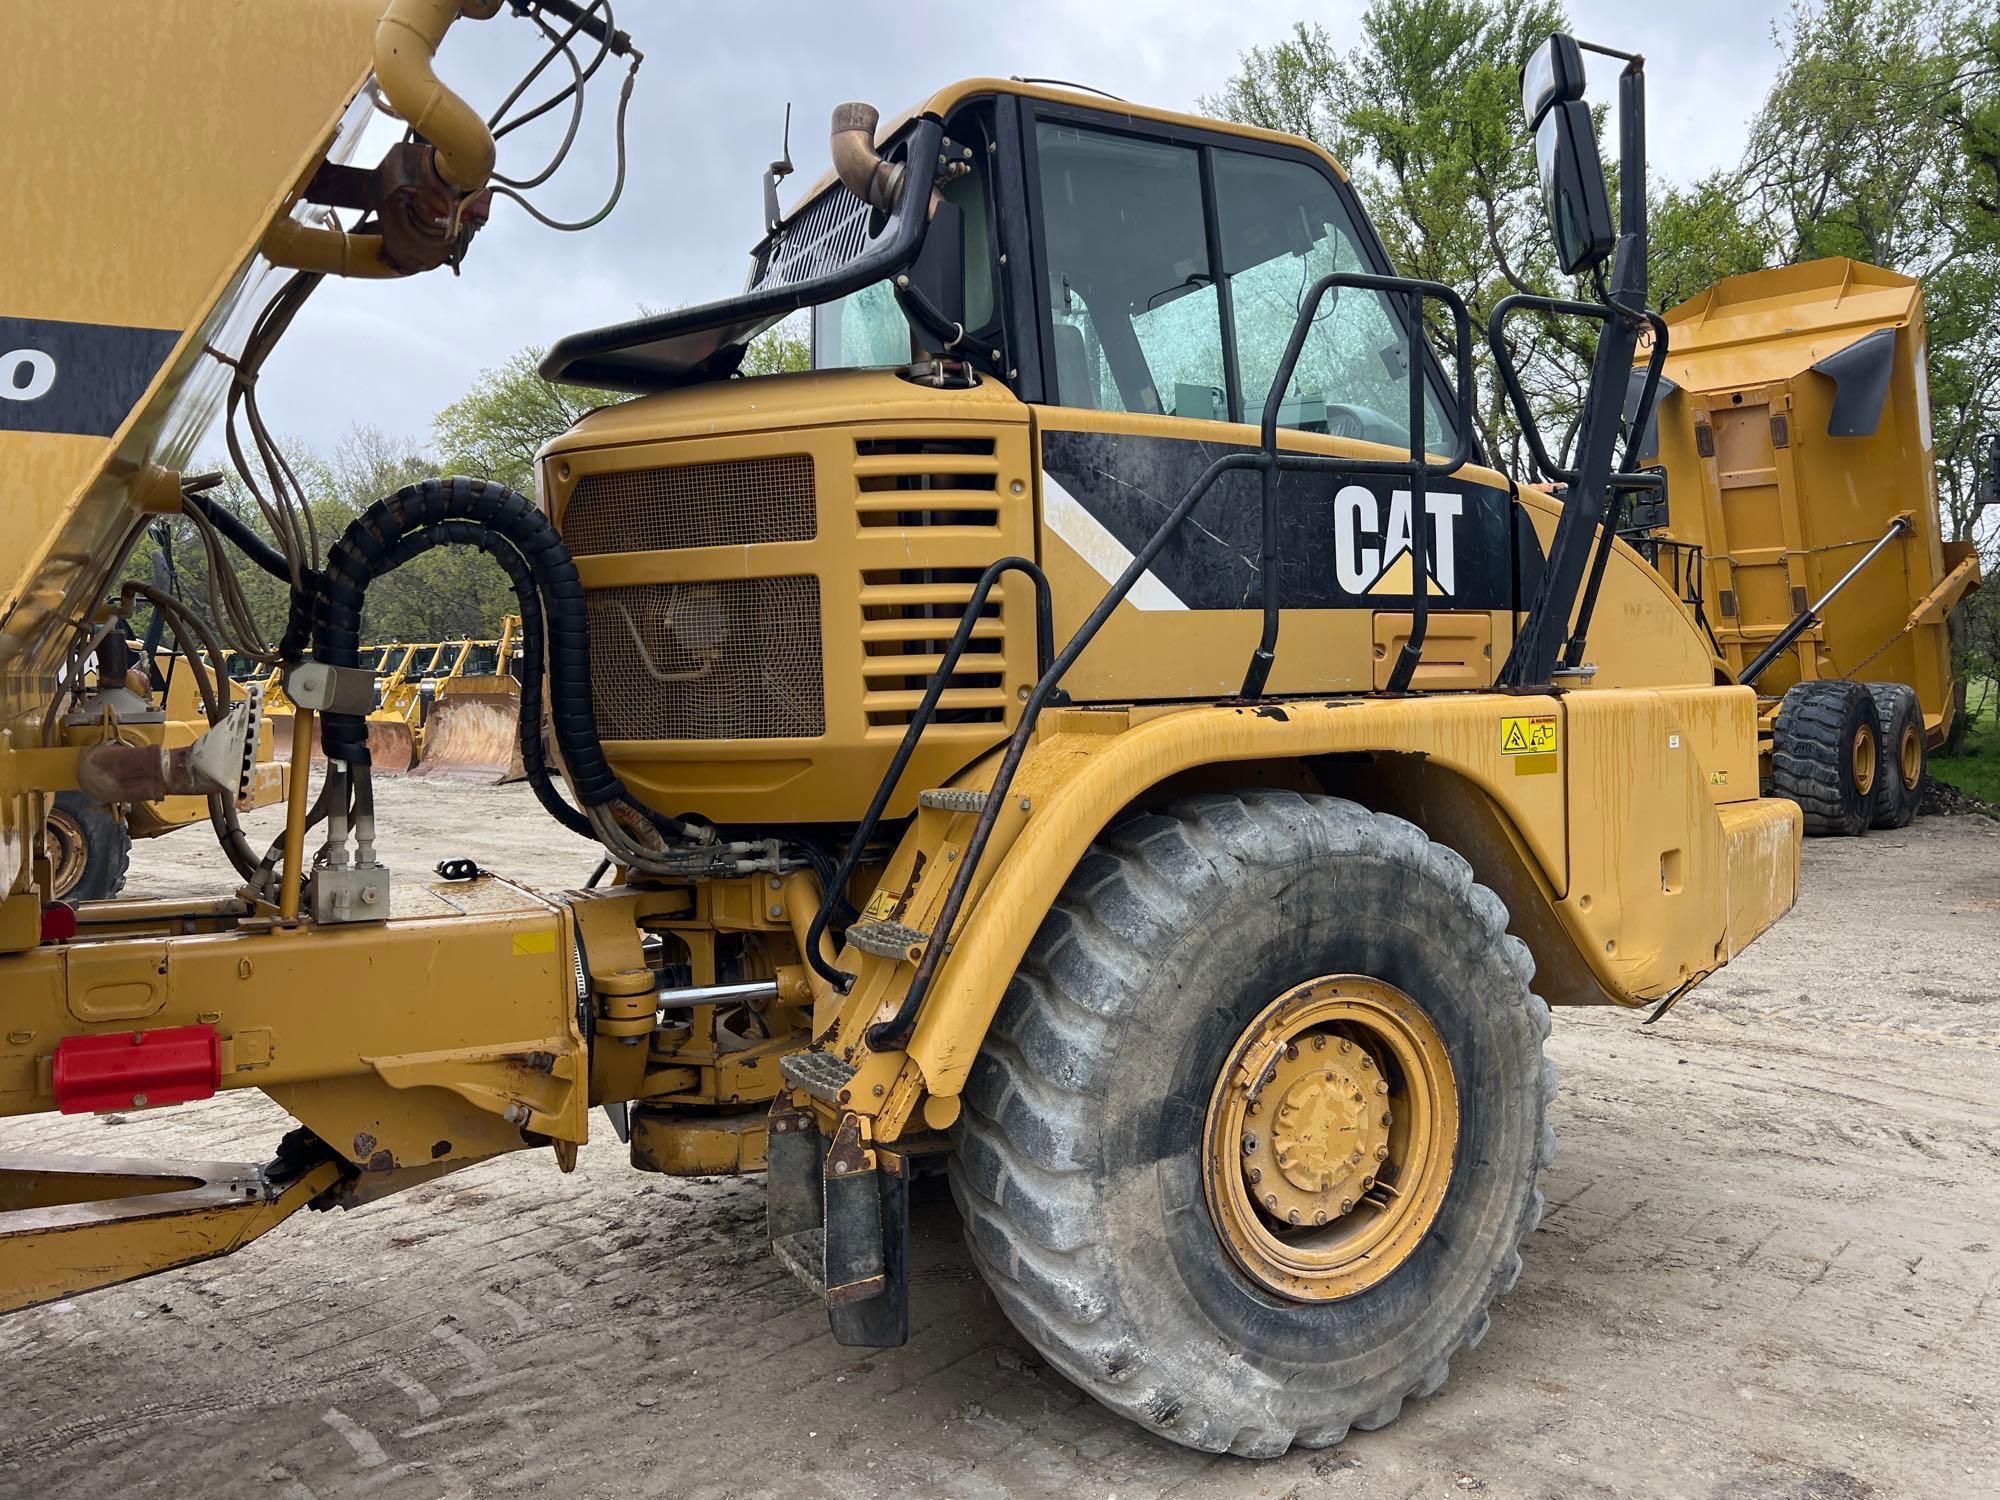 2012 CAT 725 WATER TRUCK SN:CAT00725KB1L02645...6x6, powered by Cat C11 diesel engine, equipped with